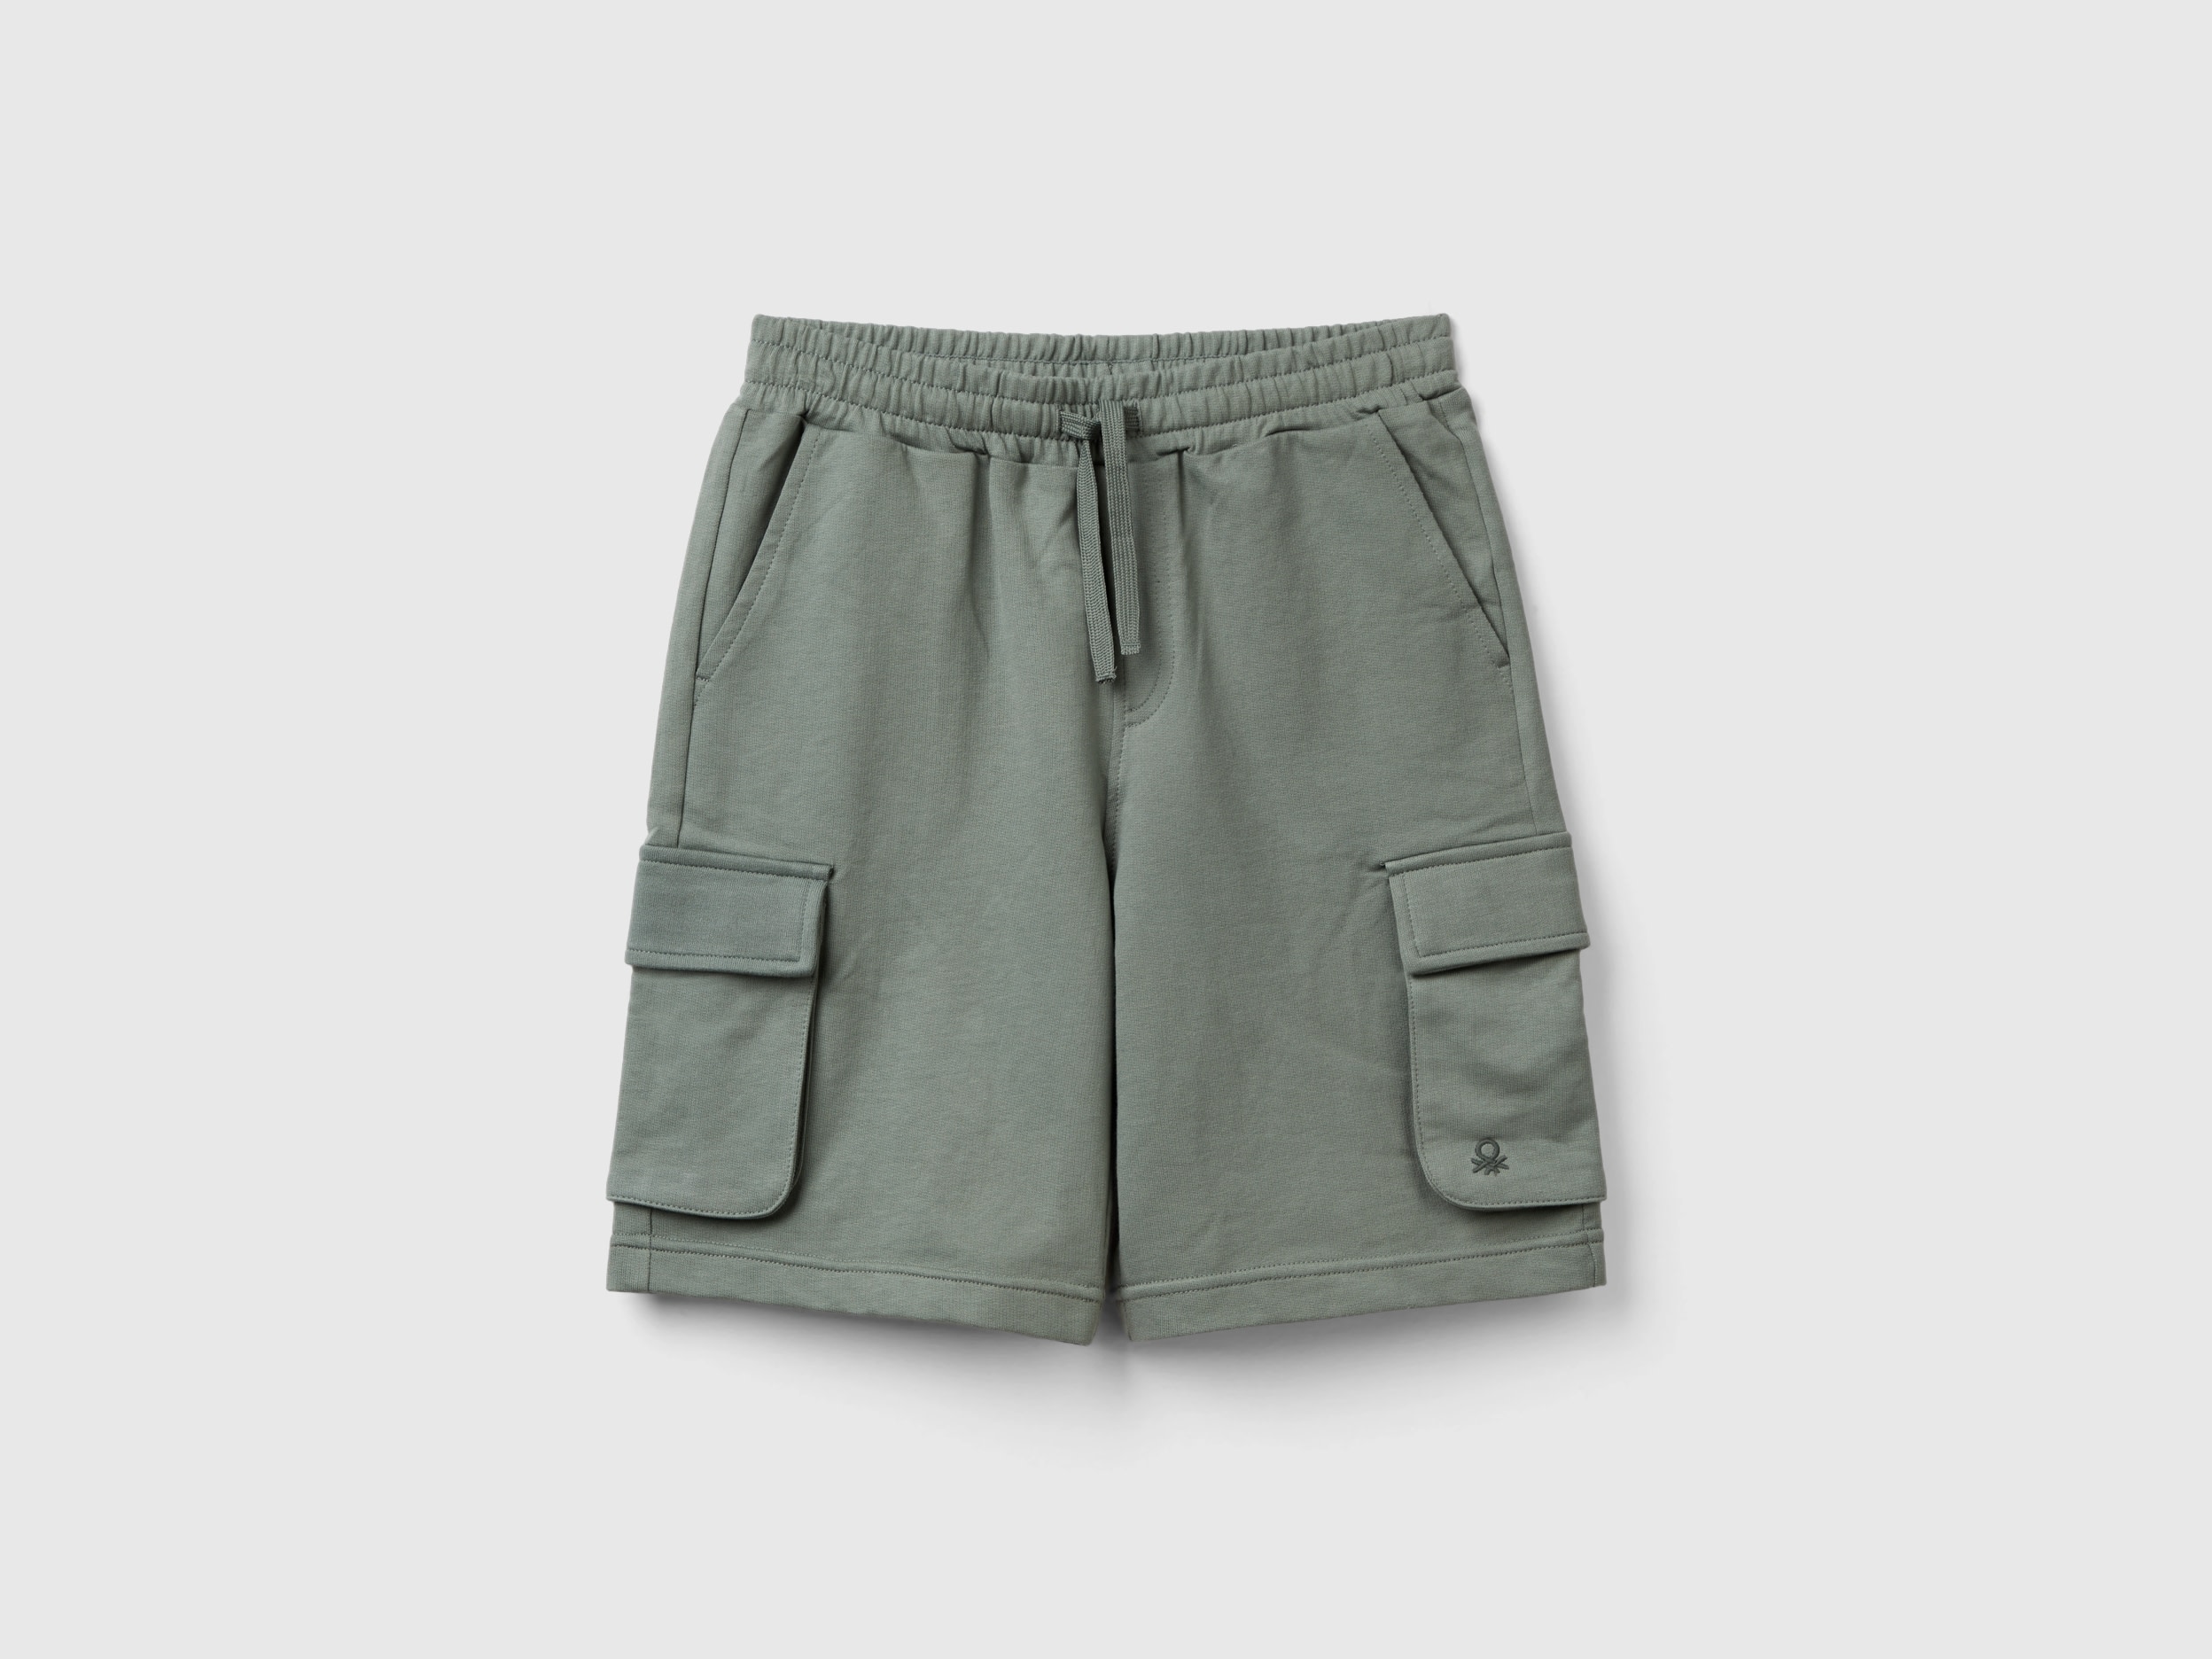 Image of Benetton, Cargo Shorts In Light Sweat Fabric, size 2XL, Military Green, Kids